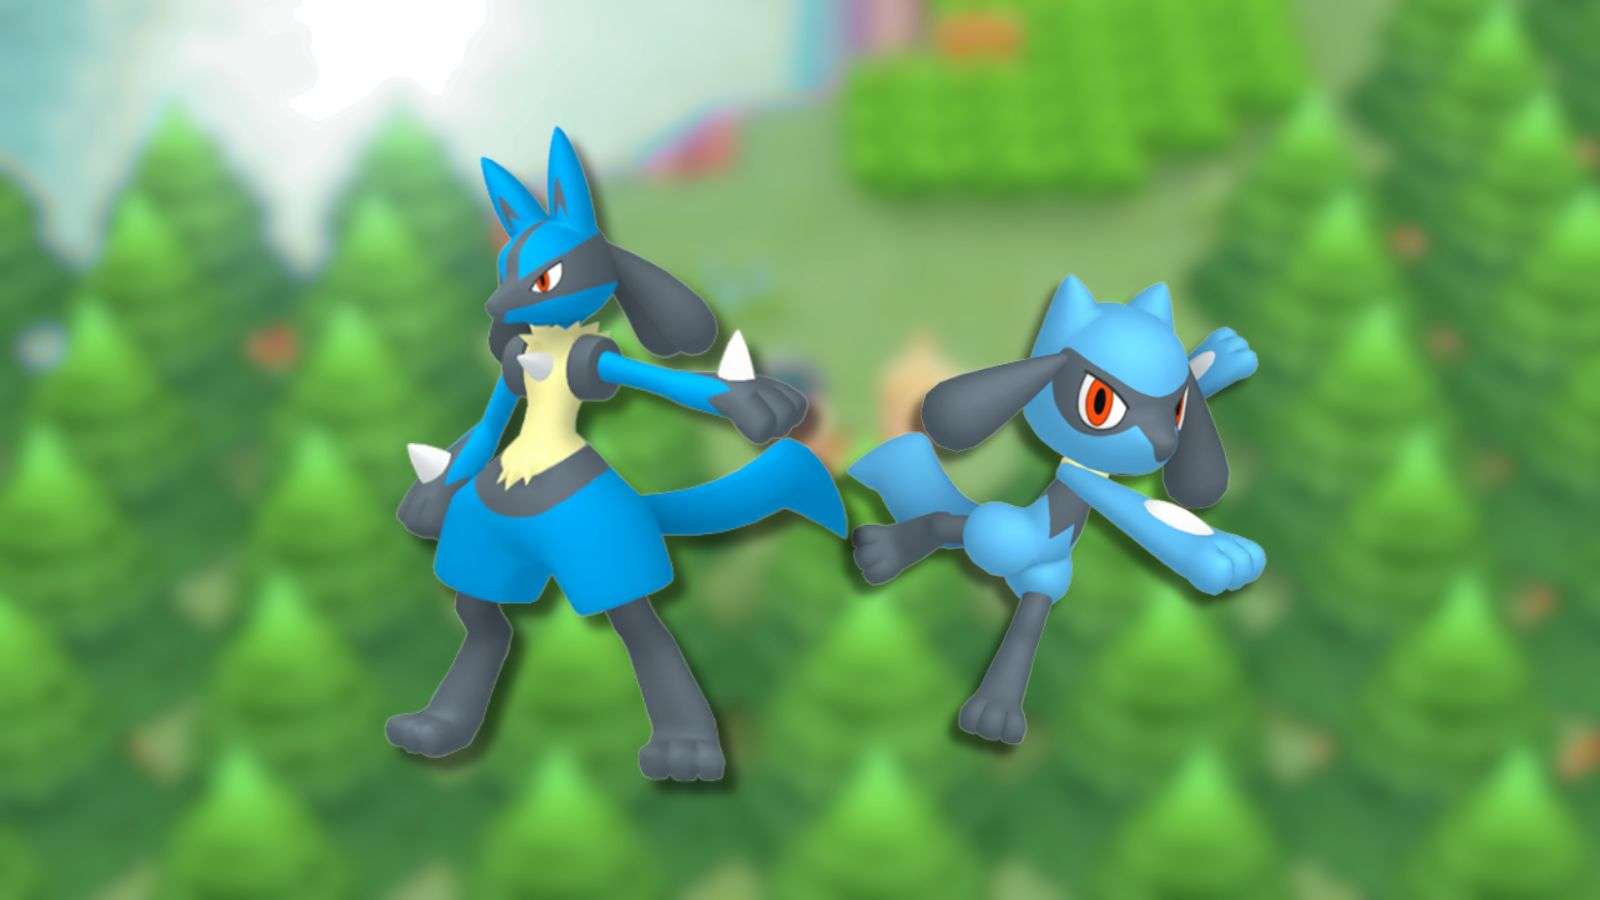 Riolu and Lucario from Pokemon BDSP.